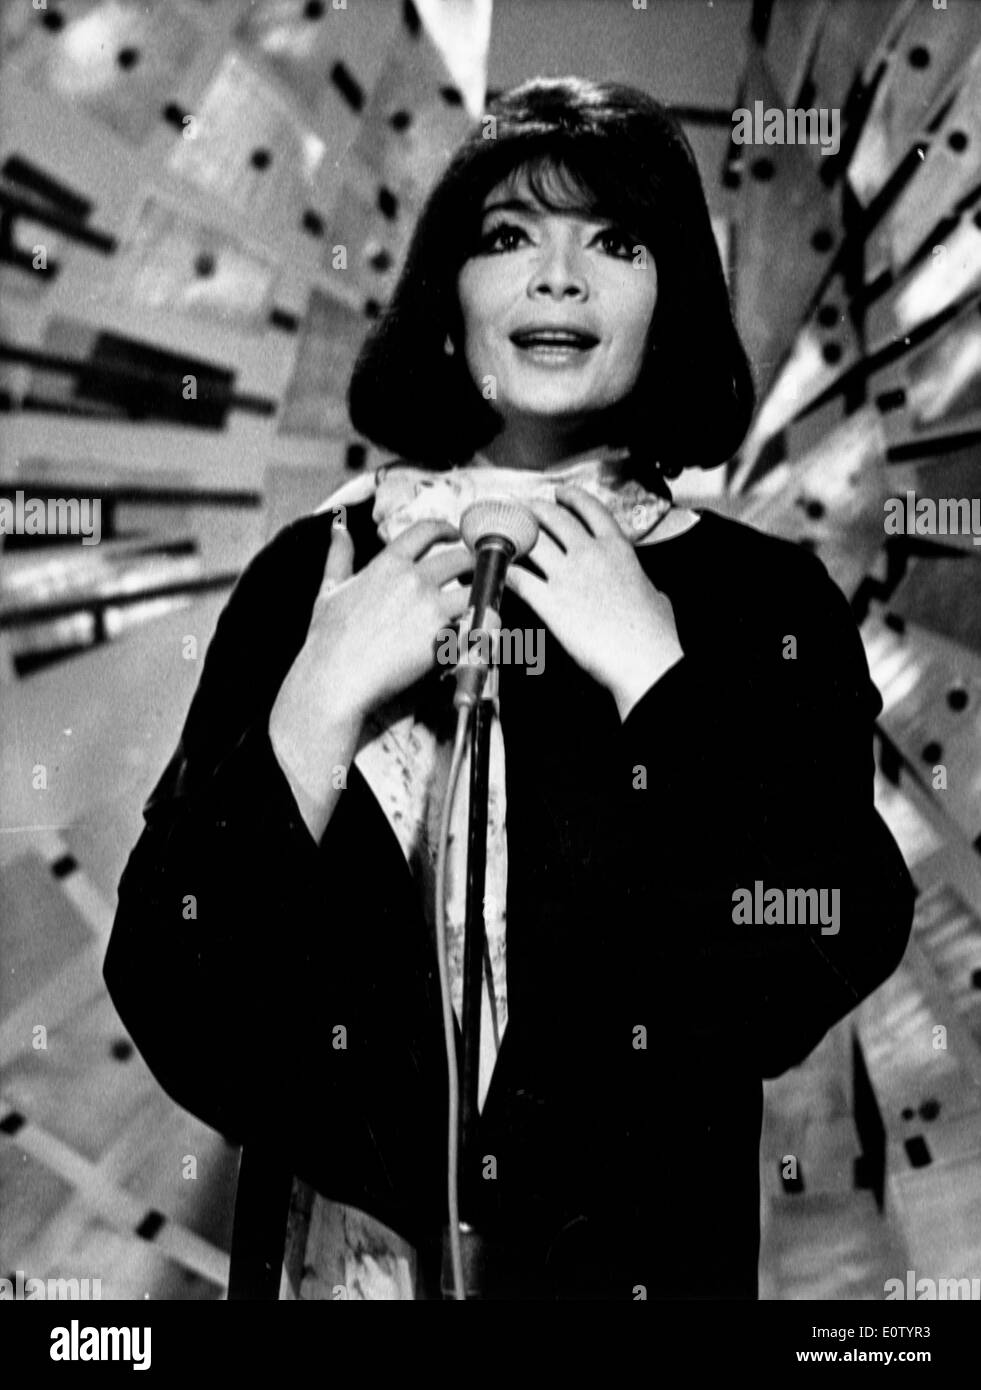 Juliette Greco on stage for a performance Stock Photo